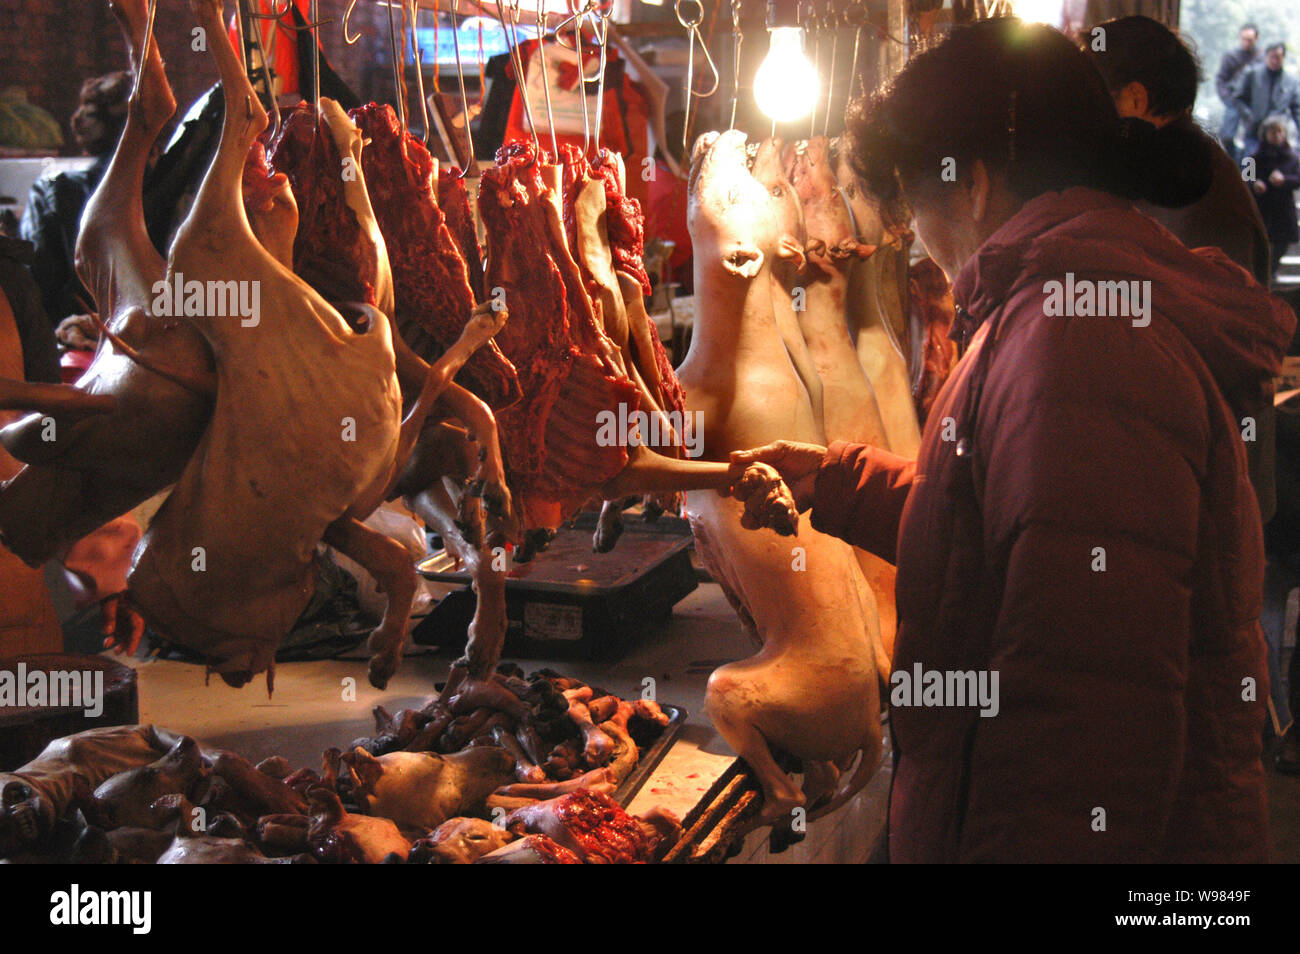 --File--Dog meat is sold at a market in Guiyang, southwest Chinas Guizhou province, 20 December 2009.   Animal activists have scored an unusually swif Stock Photo